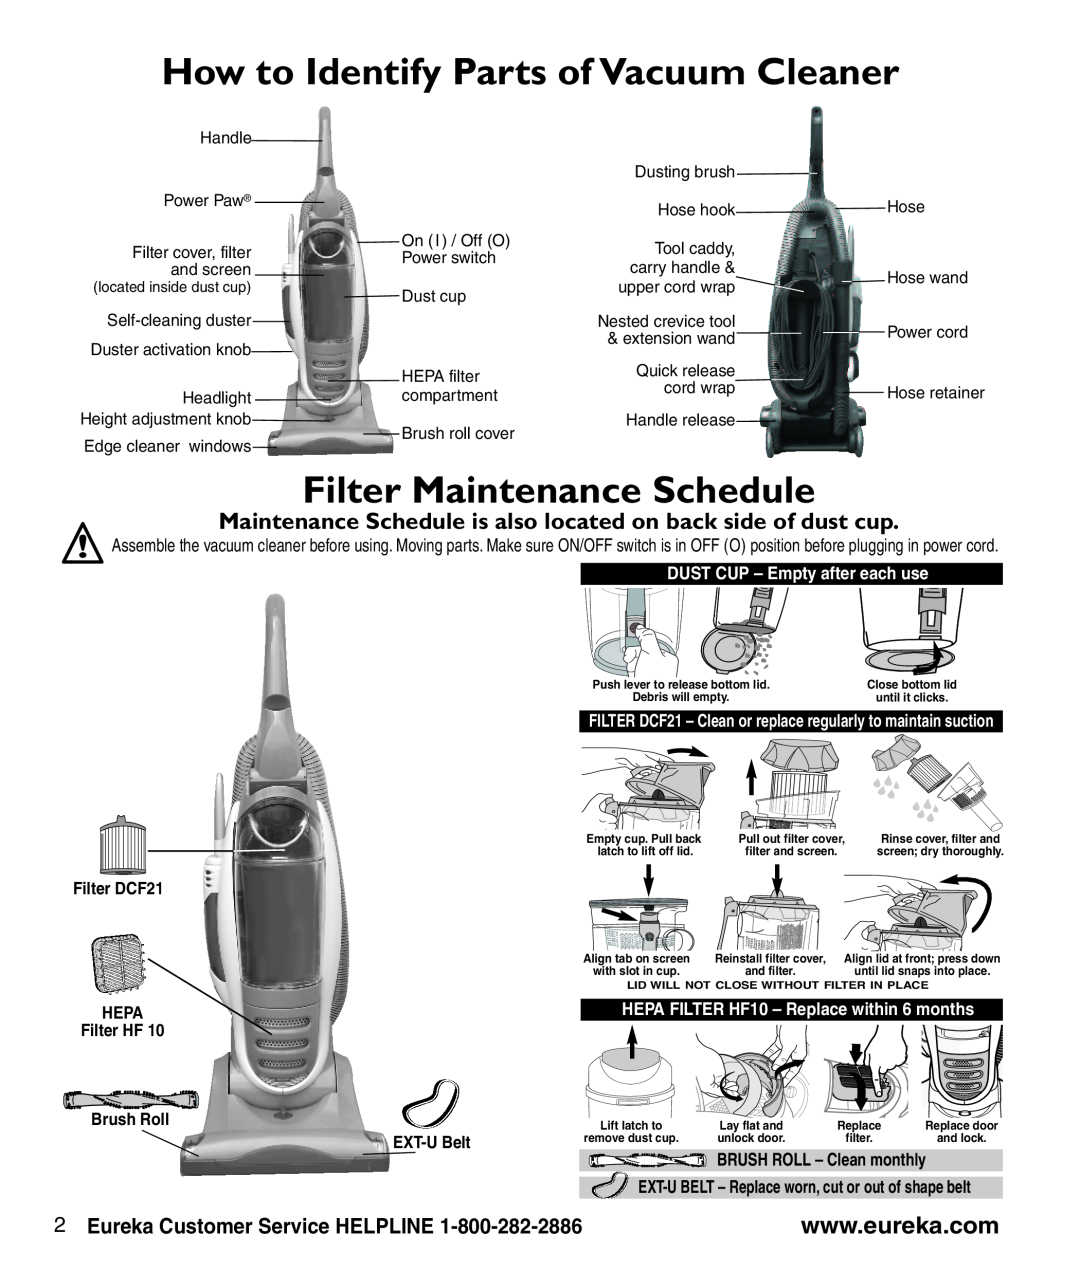 Eureka 8810-8849 SERIES manual How to Identify Parts of Vacuum Cleaner, Filter Maintenance Schedule 